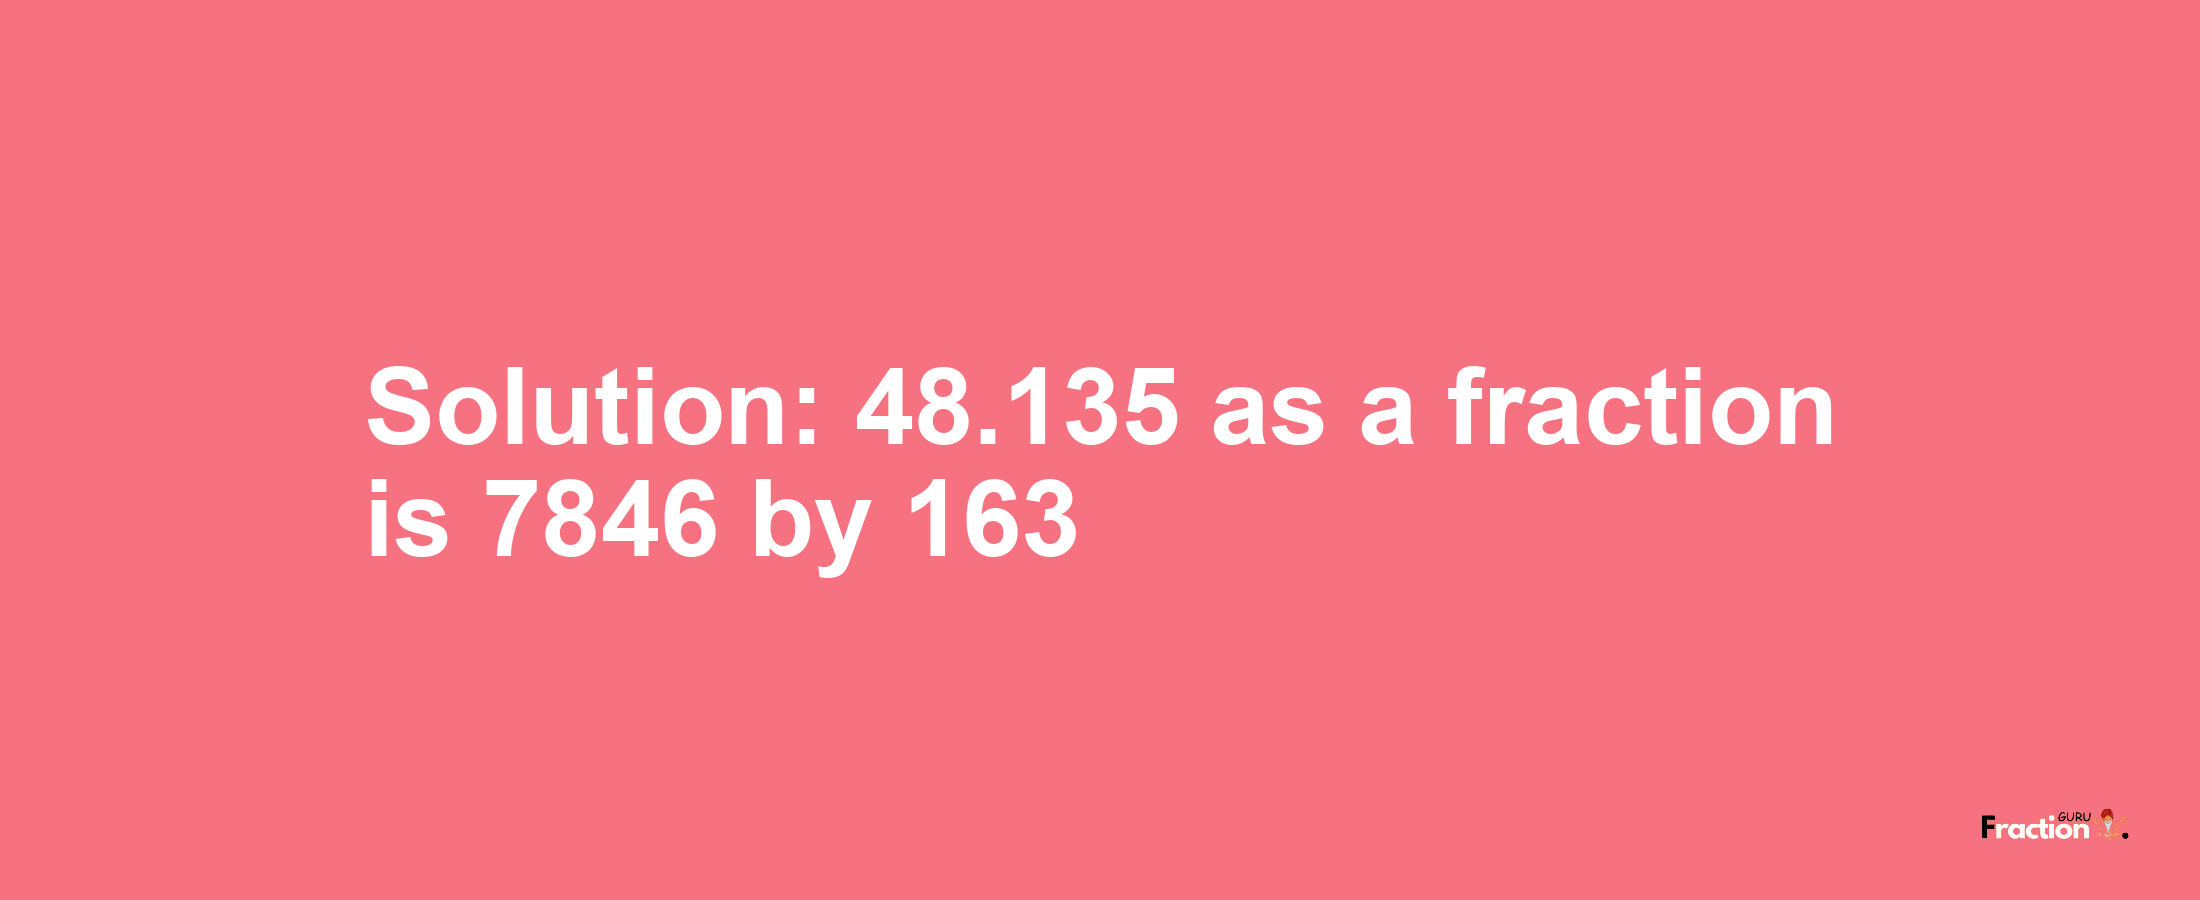 Solution:48.135 as a fraction is 7846/163